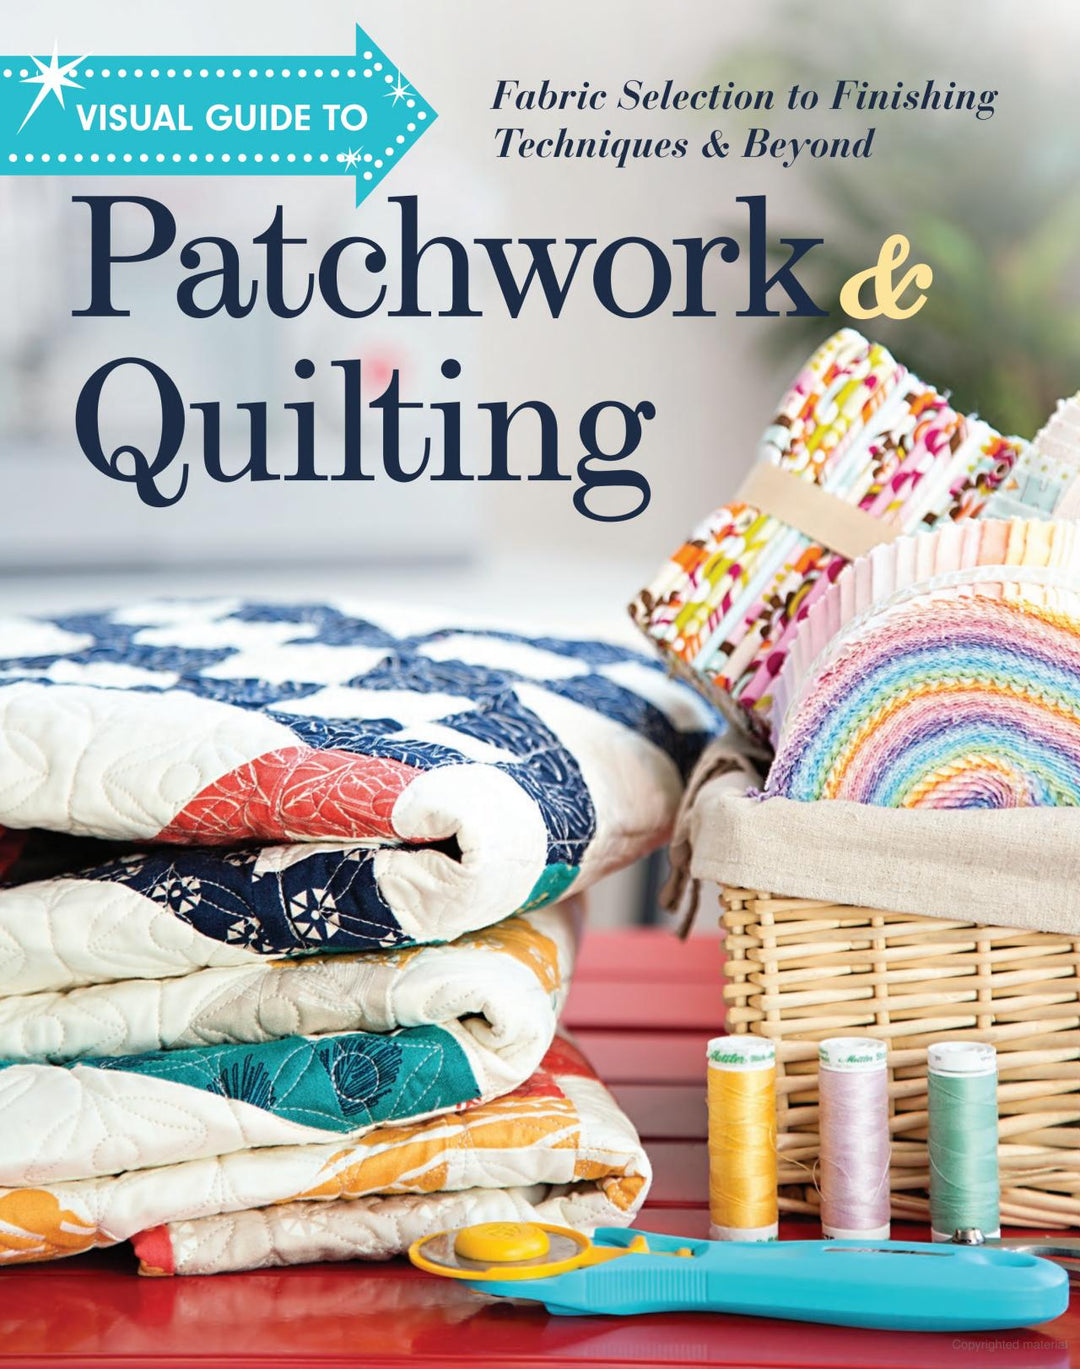 Visual Guide to Patchwork & Quilting